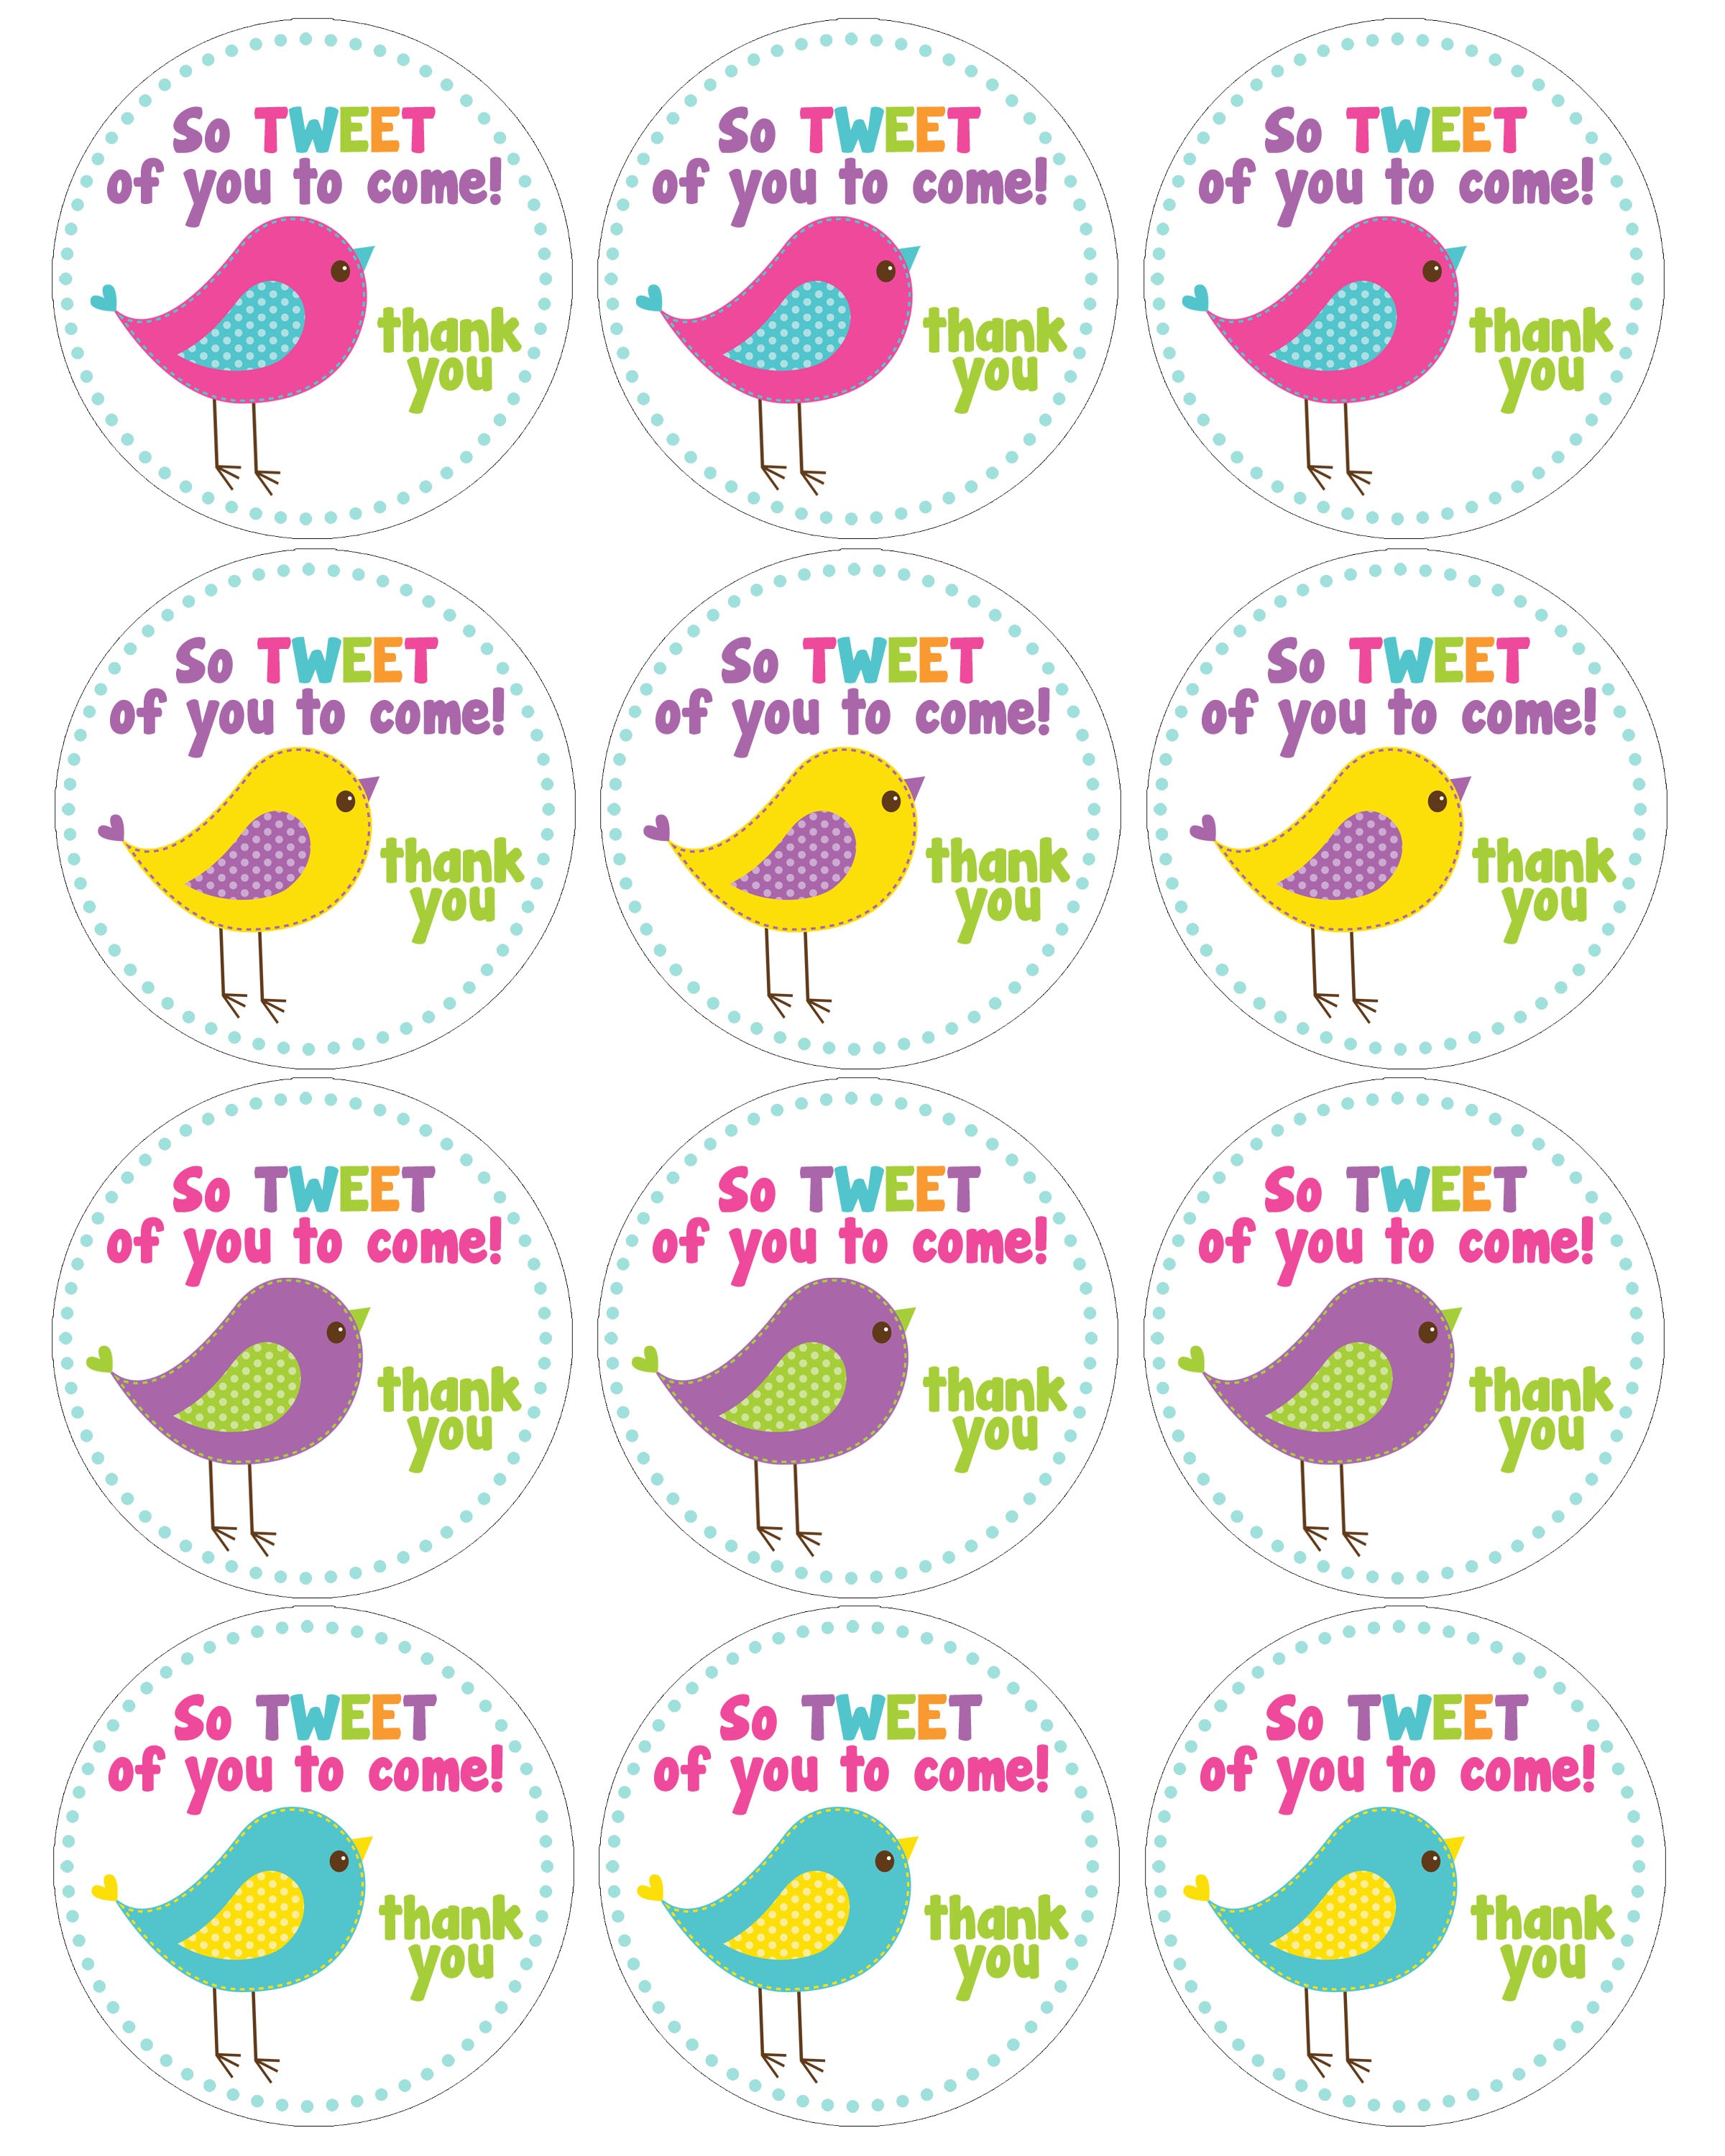 5-best-images-of-free-printable-happy-birthday-cupcake-toppers-happy